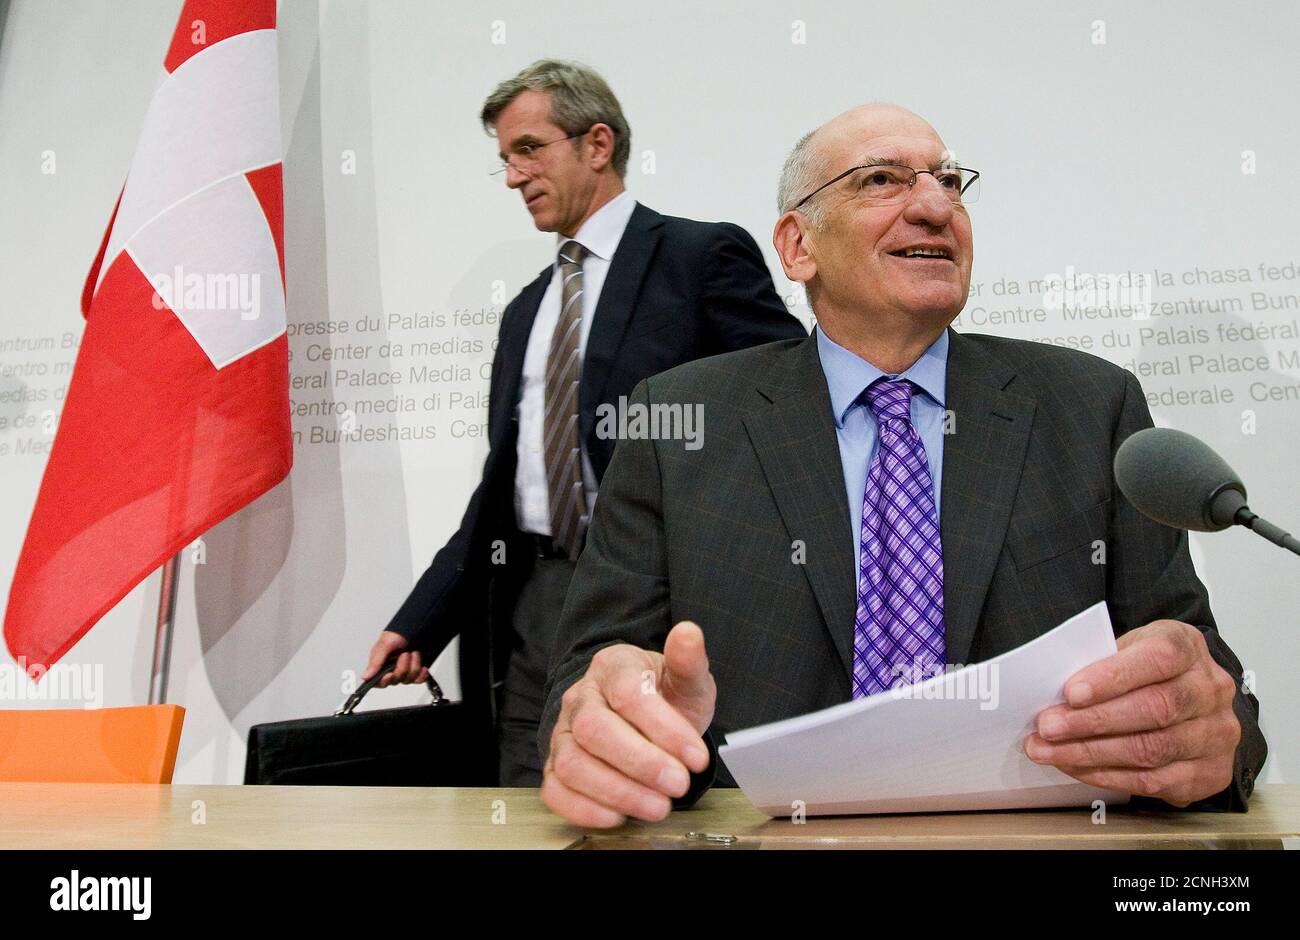 Swiss Interior Minister Pascal Couchepin (R) and Thomas Zeltner, Director of the Federal Office of Public Health (BAG) arrive before a news conference on the popular vote ' Yes to the complementary medicine' ('Ja zur Komplementaermedizin') in Bern April 9, 2009. REUTERS/Pascal Lauener (SWITZERLAND) Stock Photo